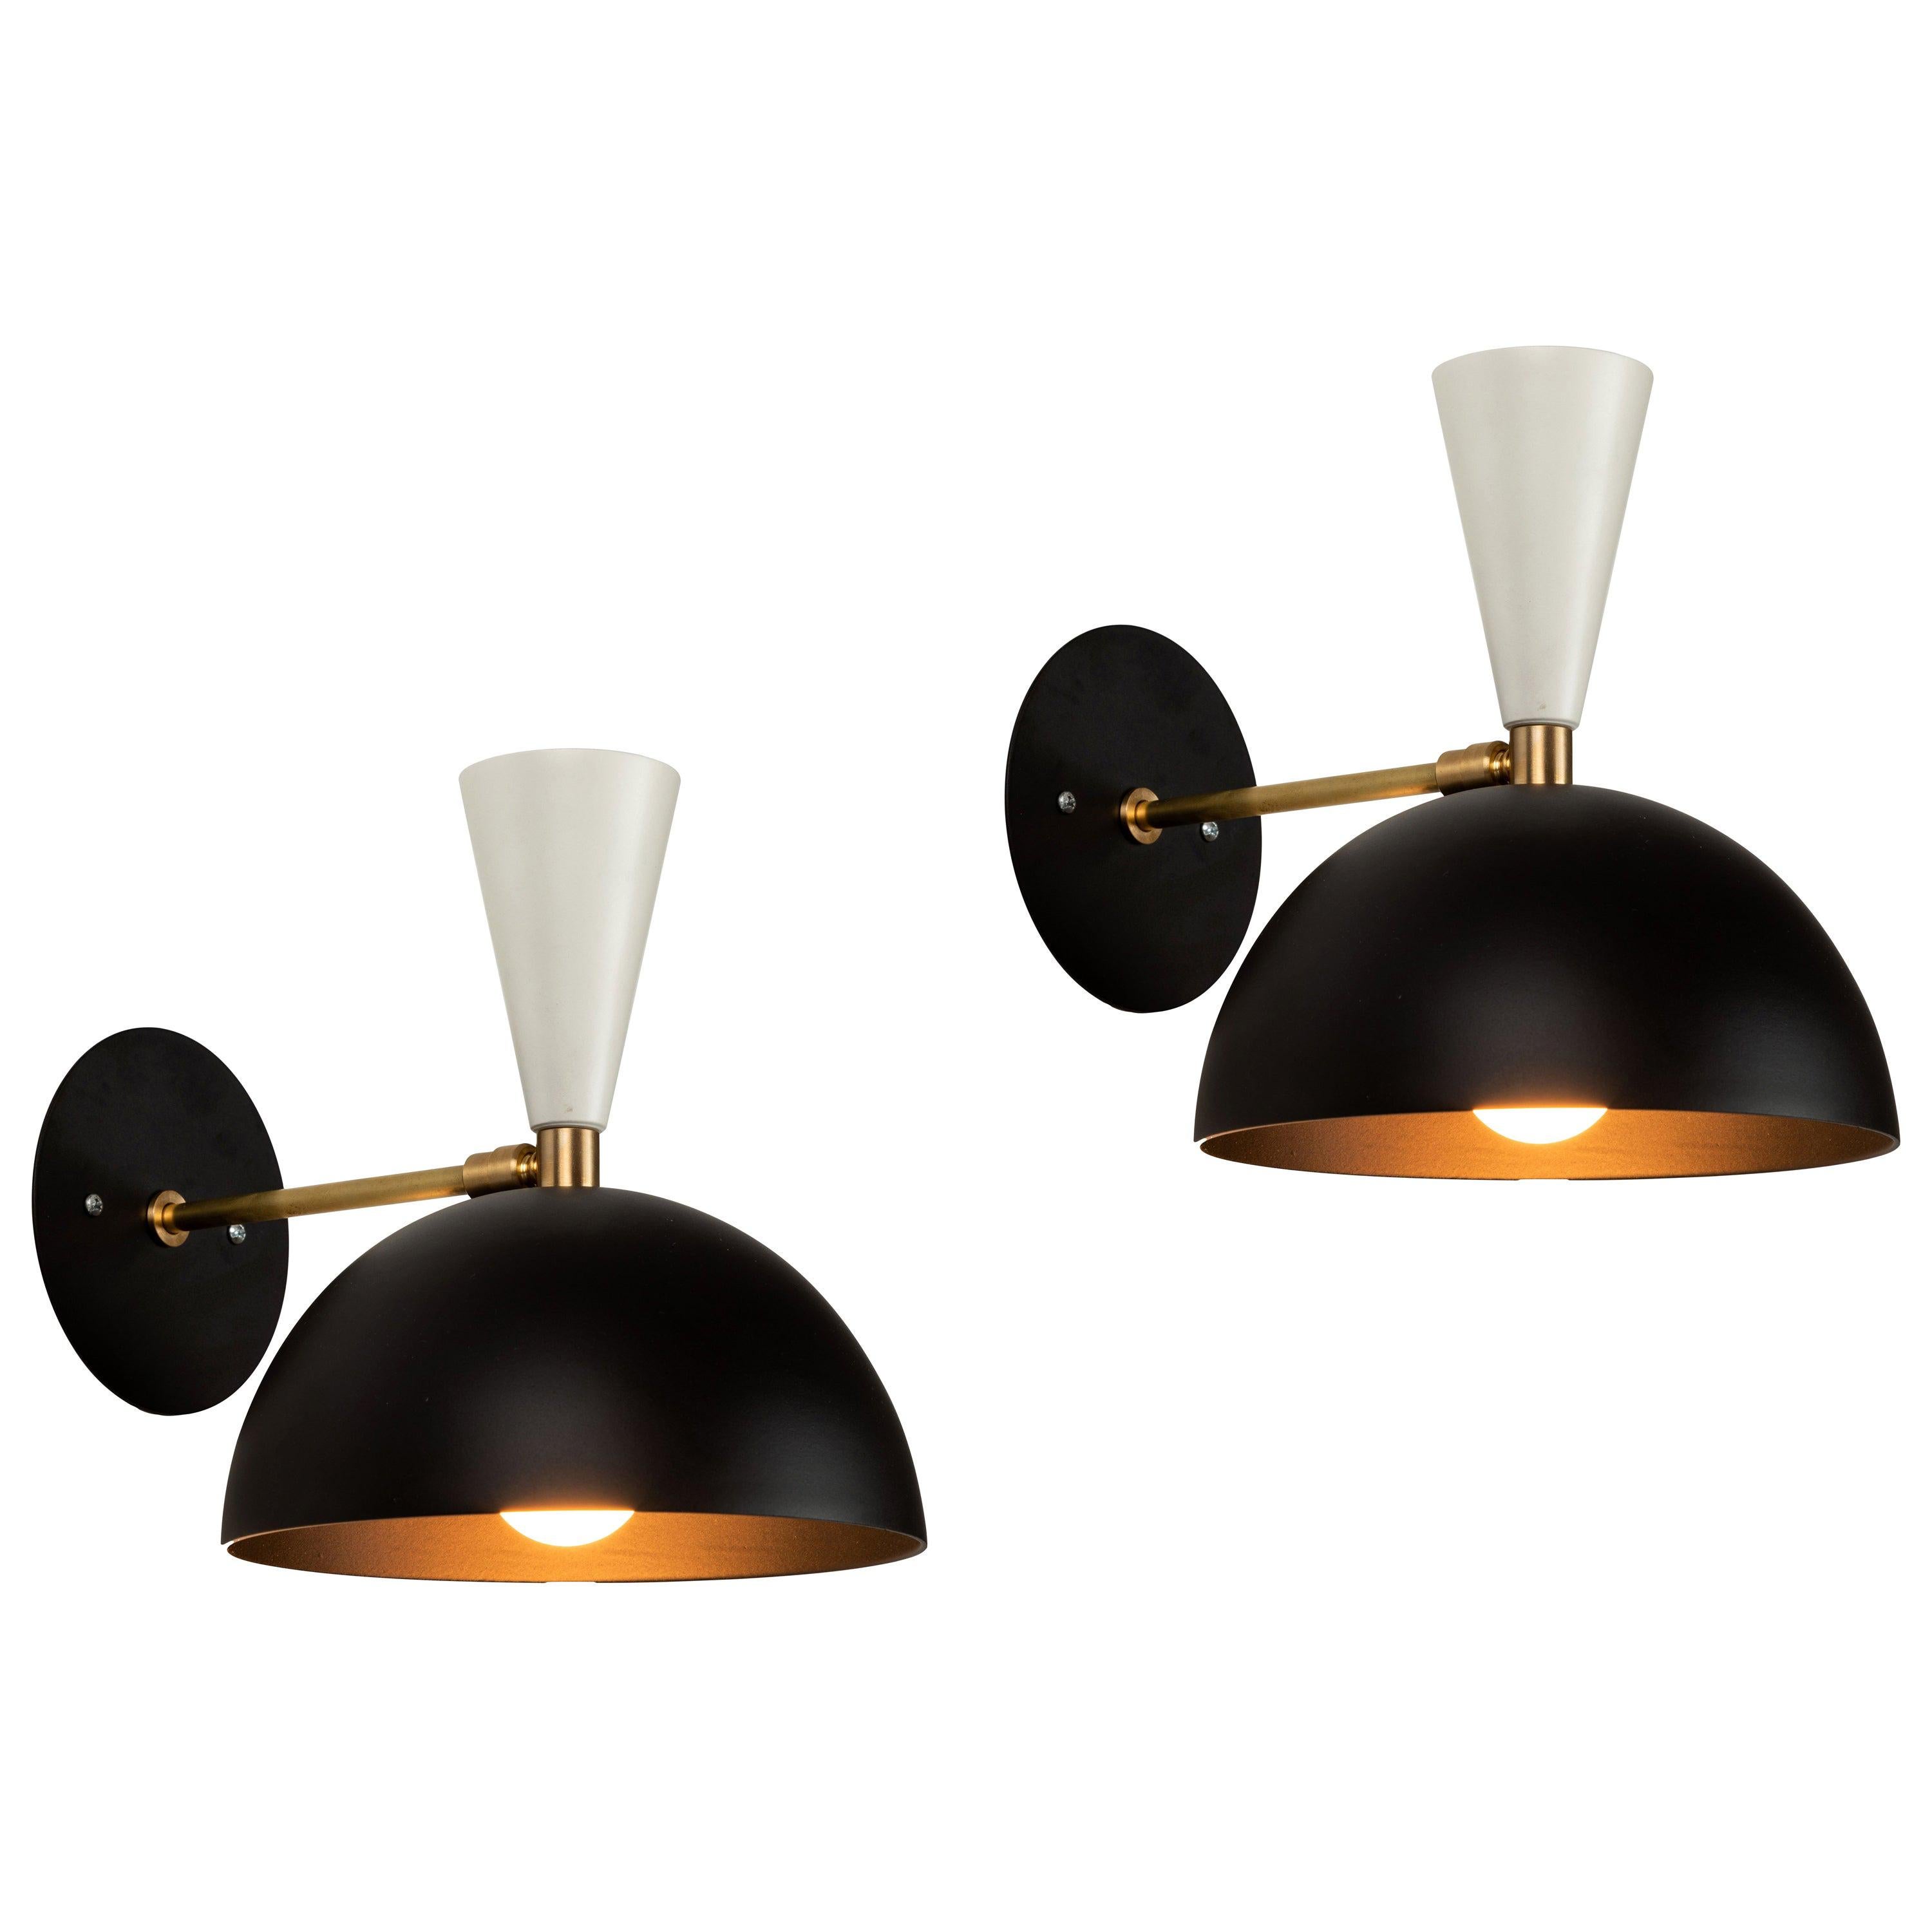 Pair of Large 'Lola II' Sconces in Black and White